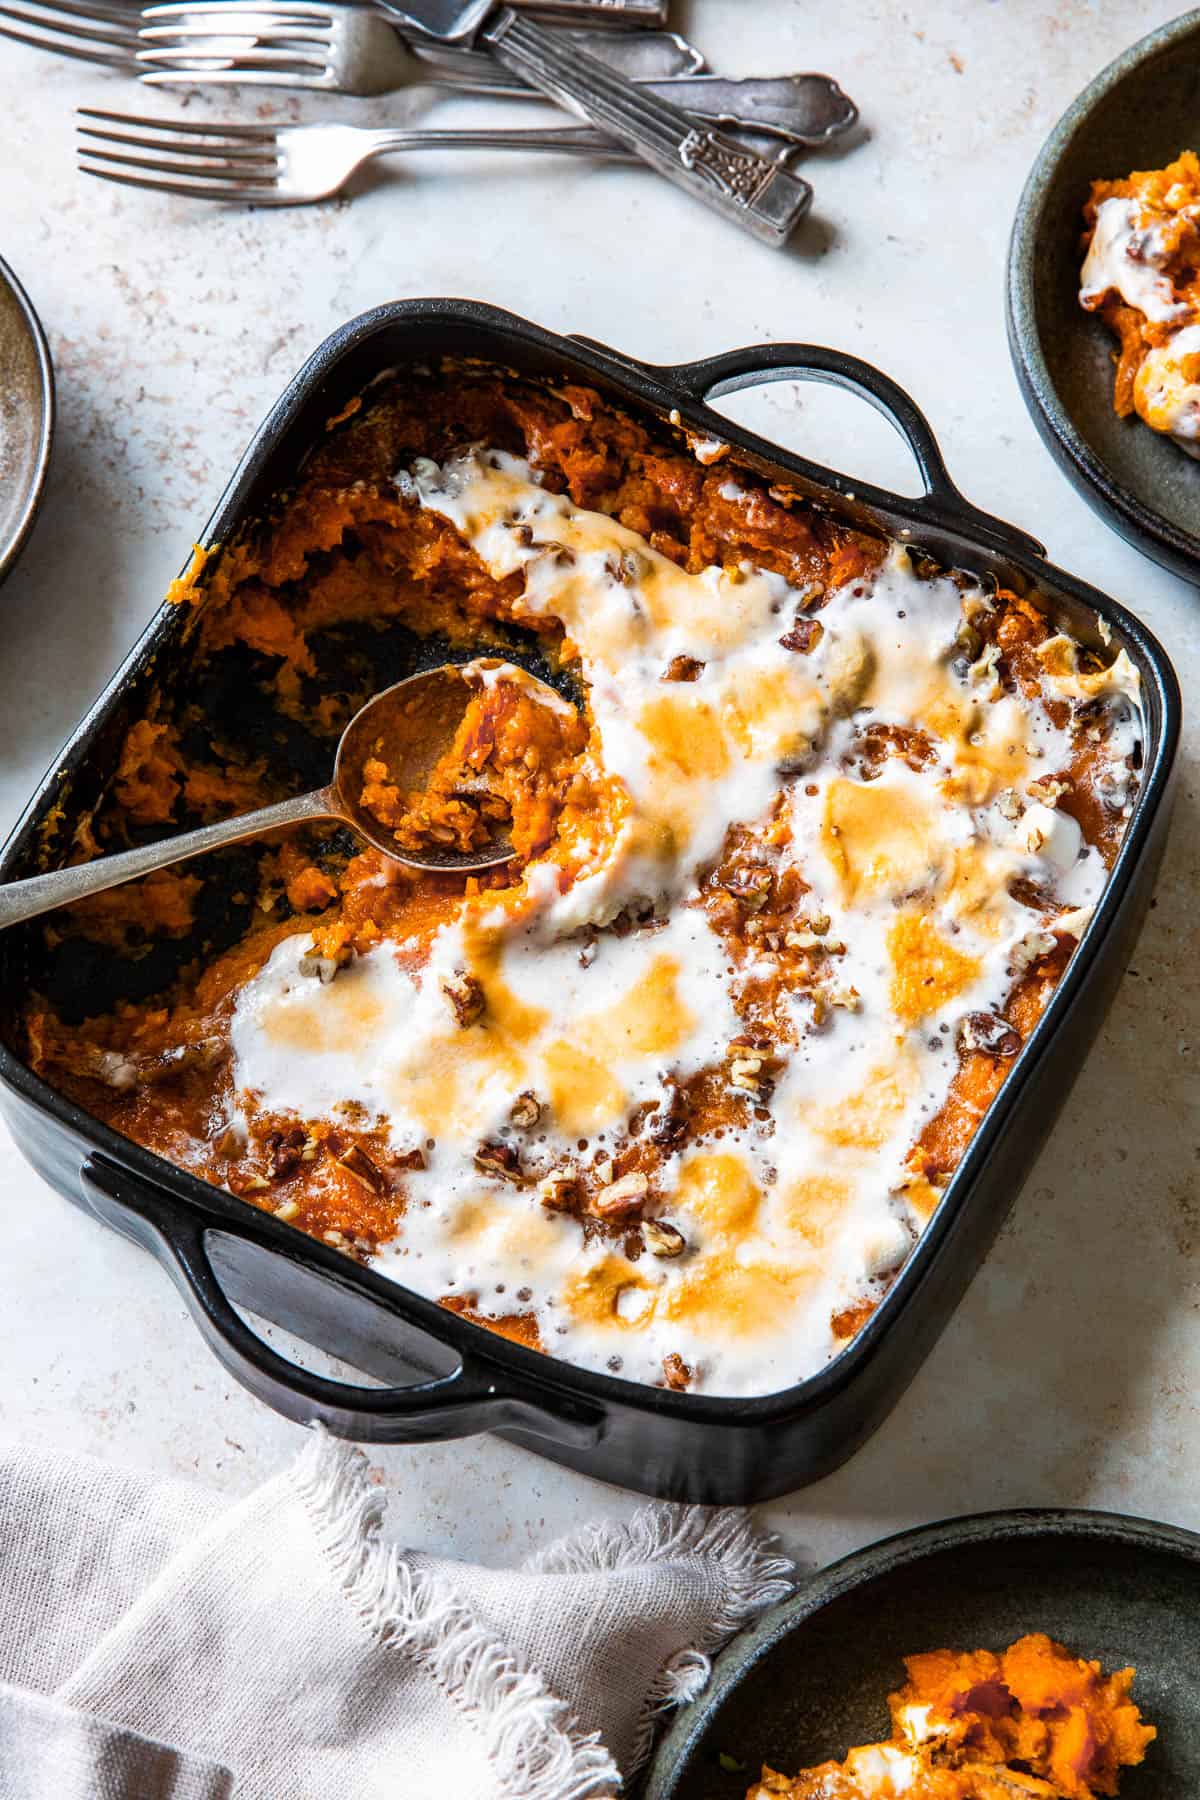 a square black baking dish filled with sweet potato casserole, topped with melted marshmallows. The marshmallow topping is golden-brown from baking. Several portions have been scooped out, and a serving spoon rests in the empty part of the dish.